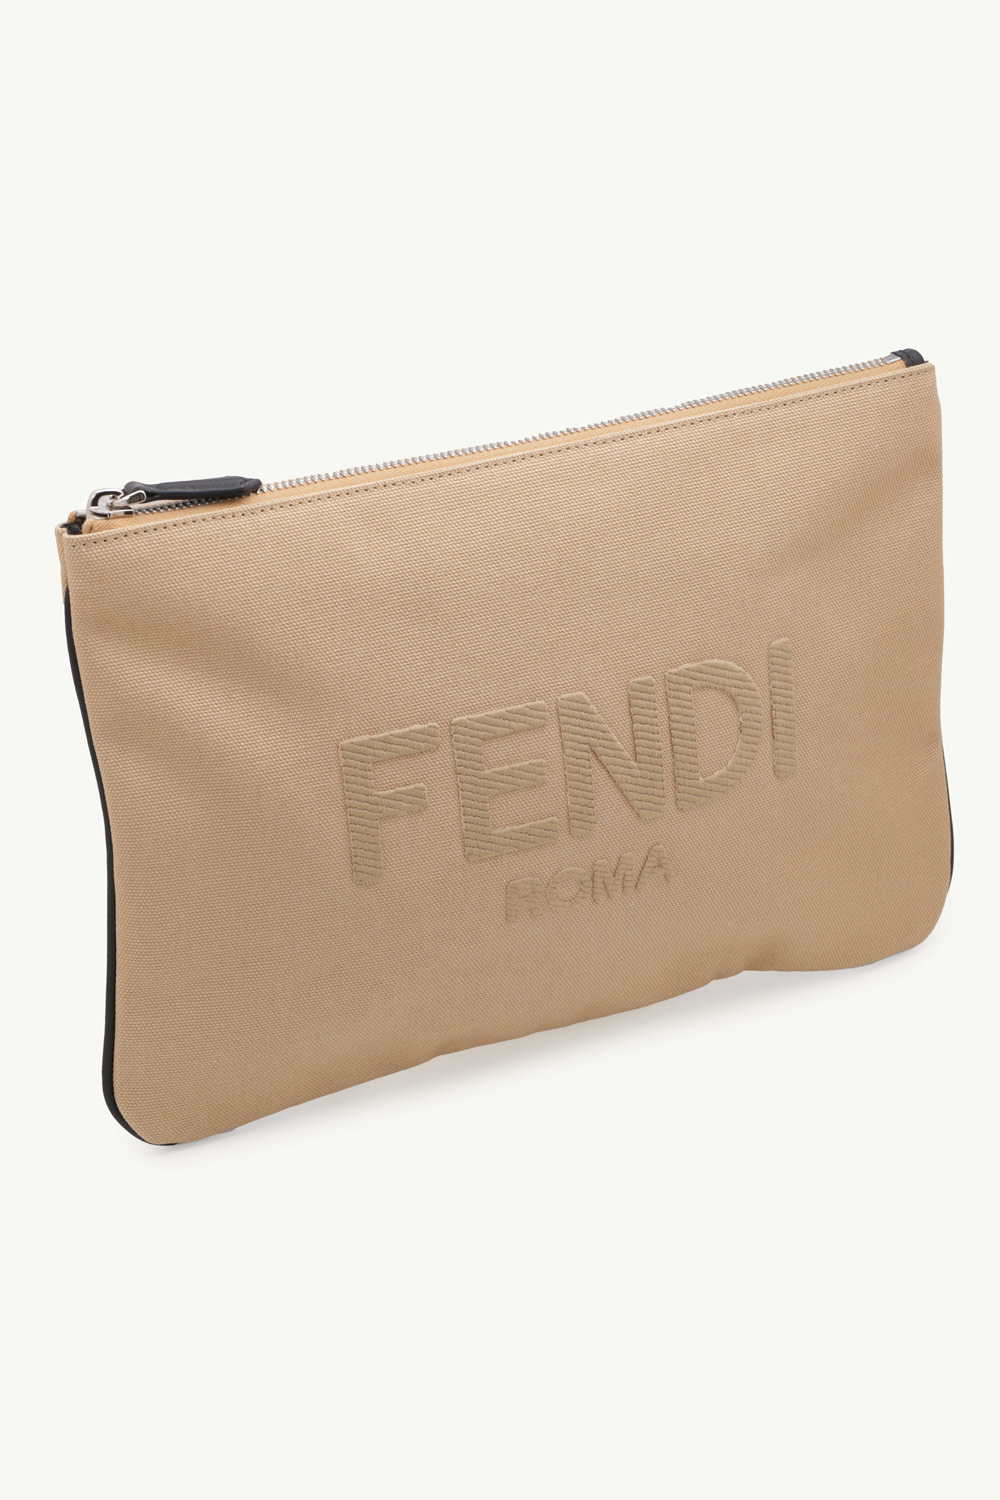 FENDI Medium Zipped Pouch in Beige Canvas with Embroidered FENDI ROMA Logo 2